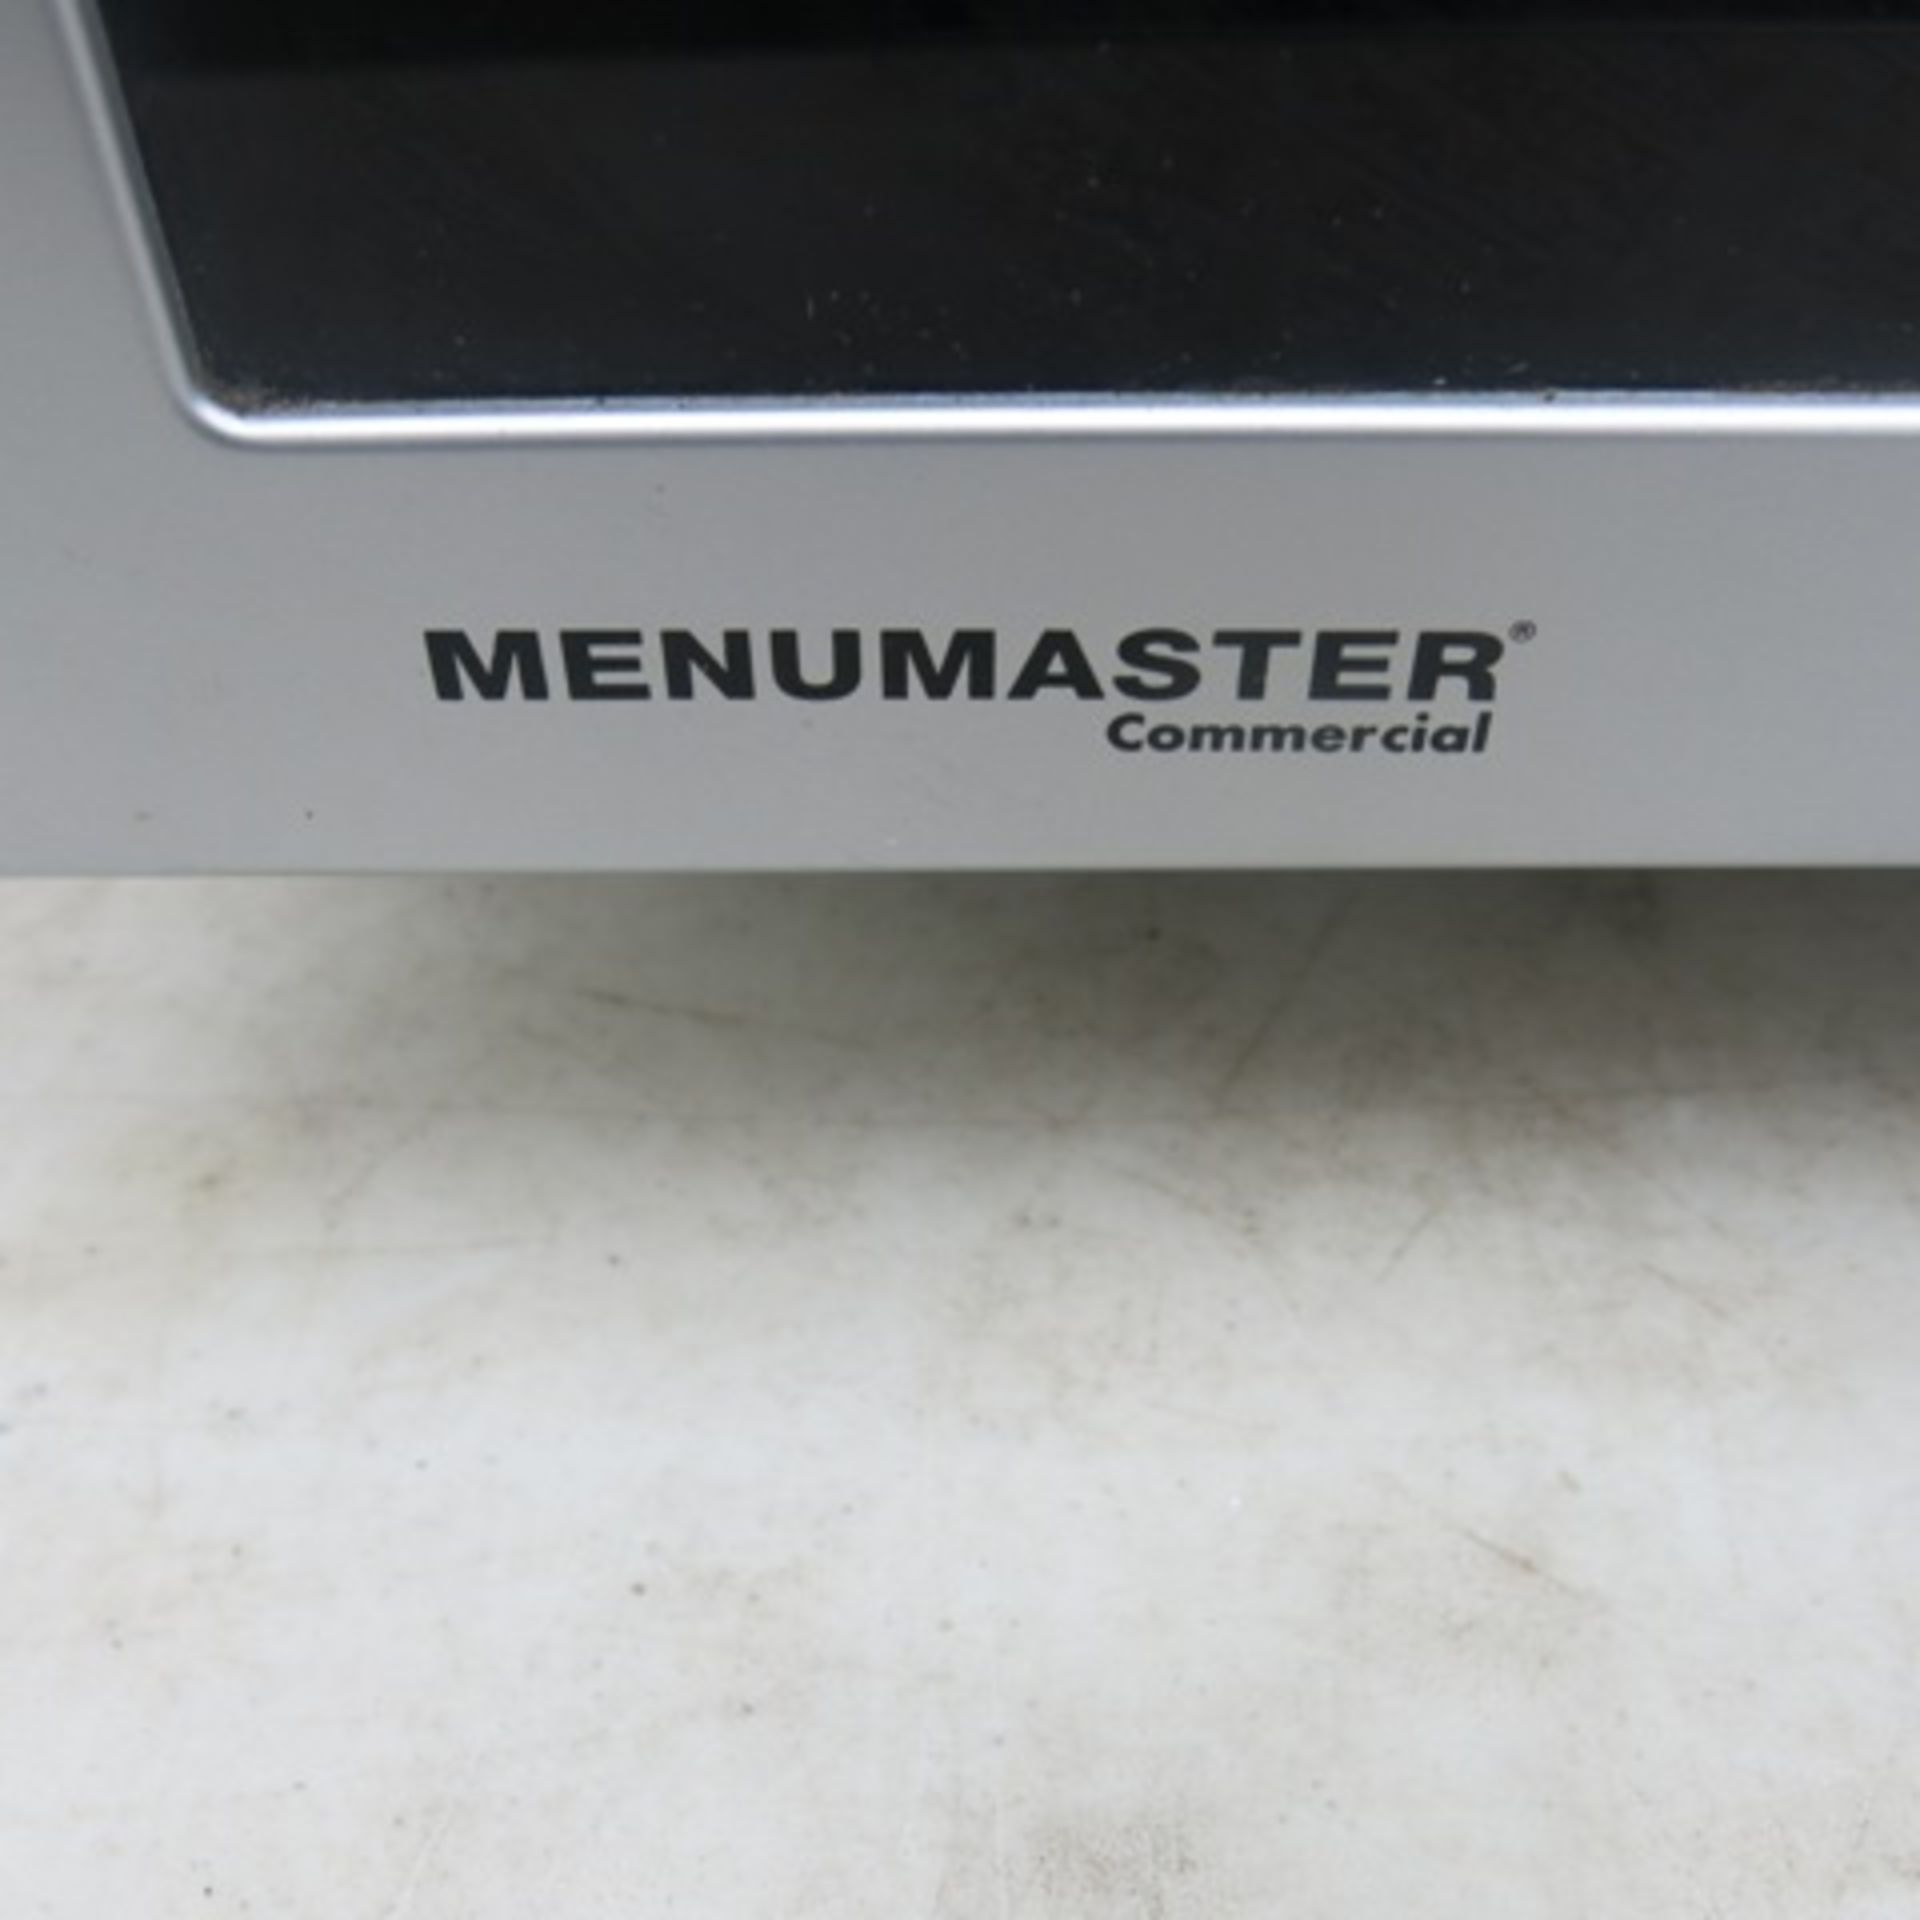 Menumaster Commercial 1550w Microwave, Model RM5510TS - Image 2 of 5